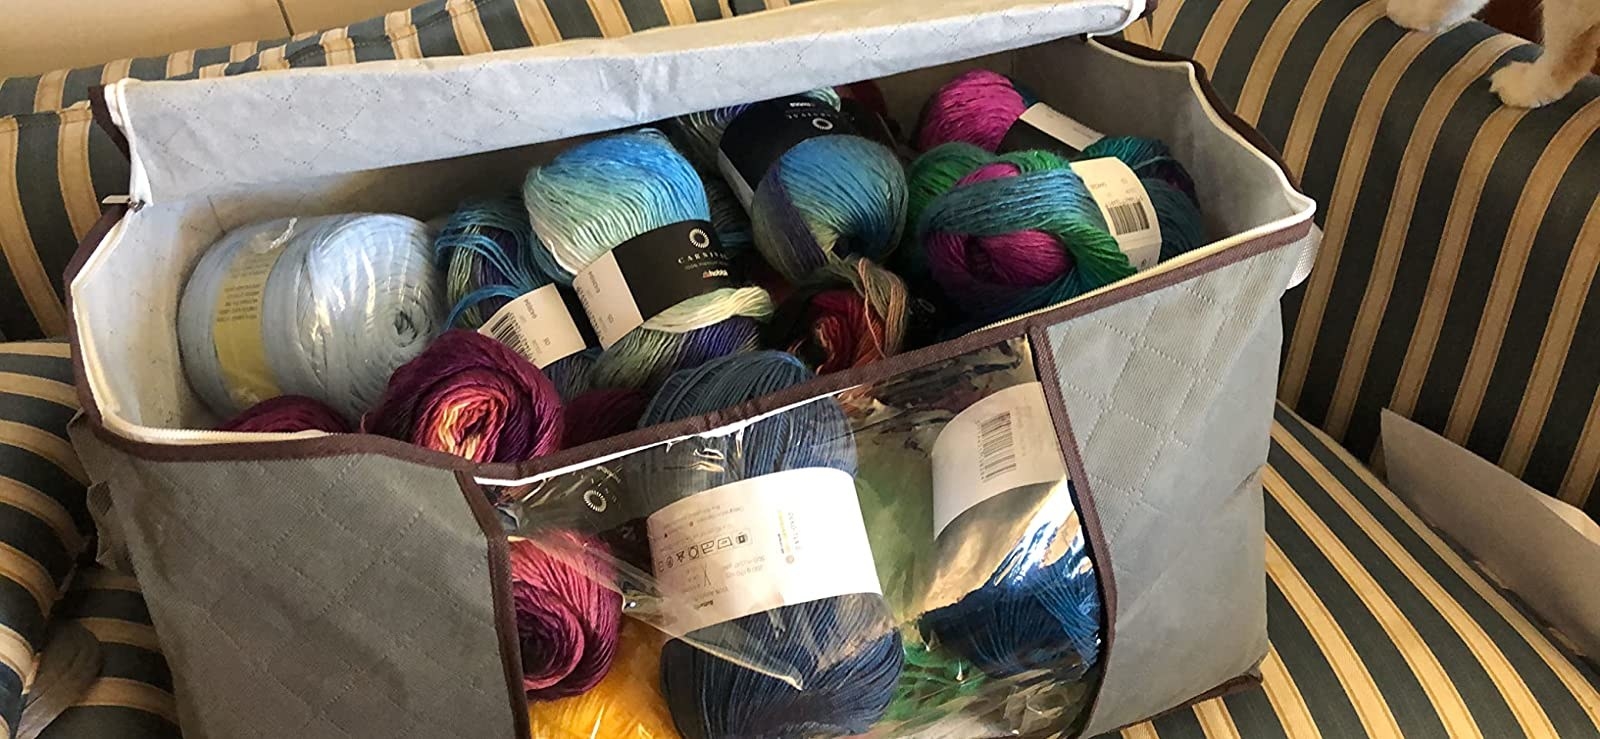 a reviewer photo of the grey bin filled with colorful balls of yarn